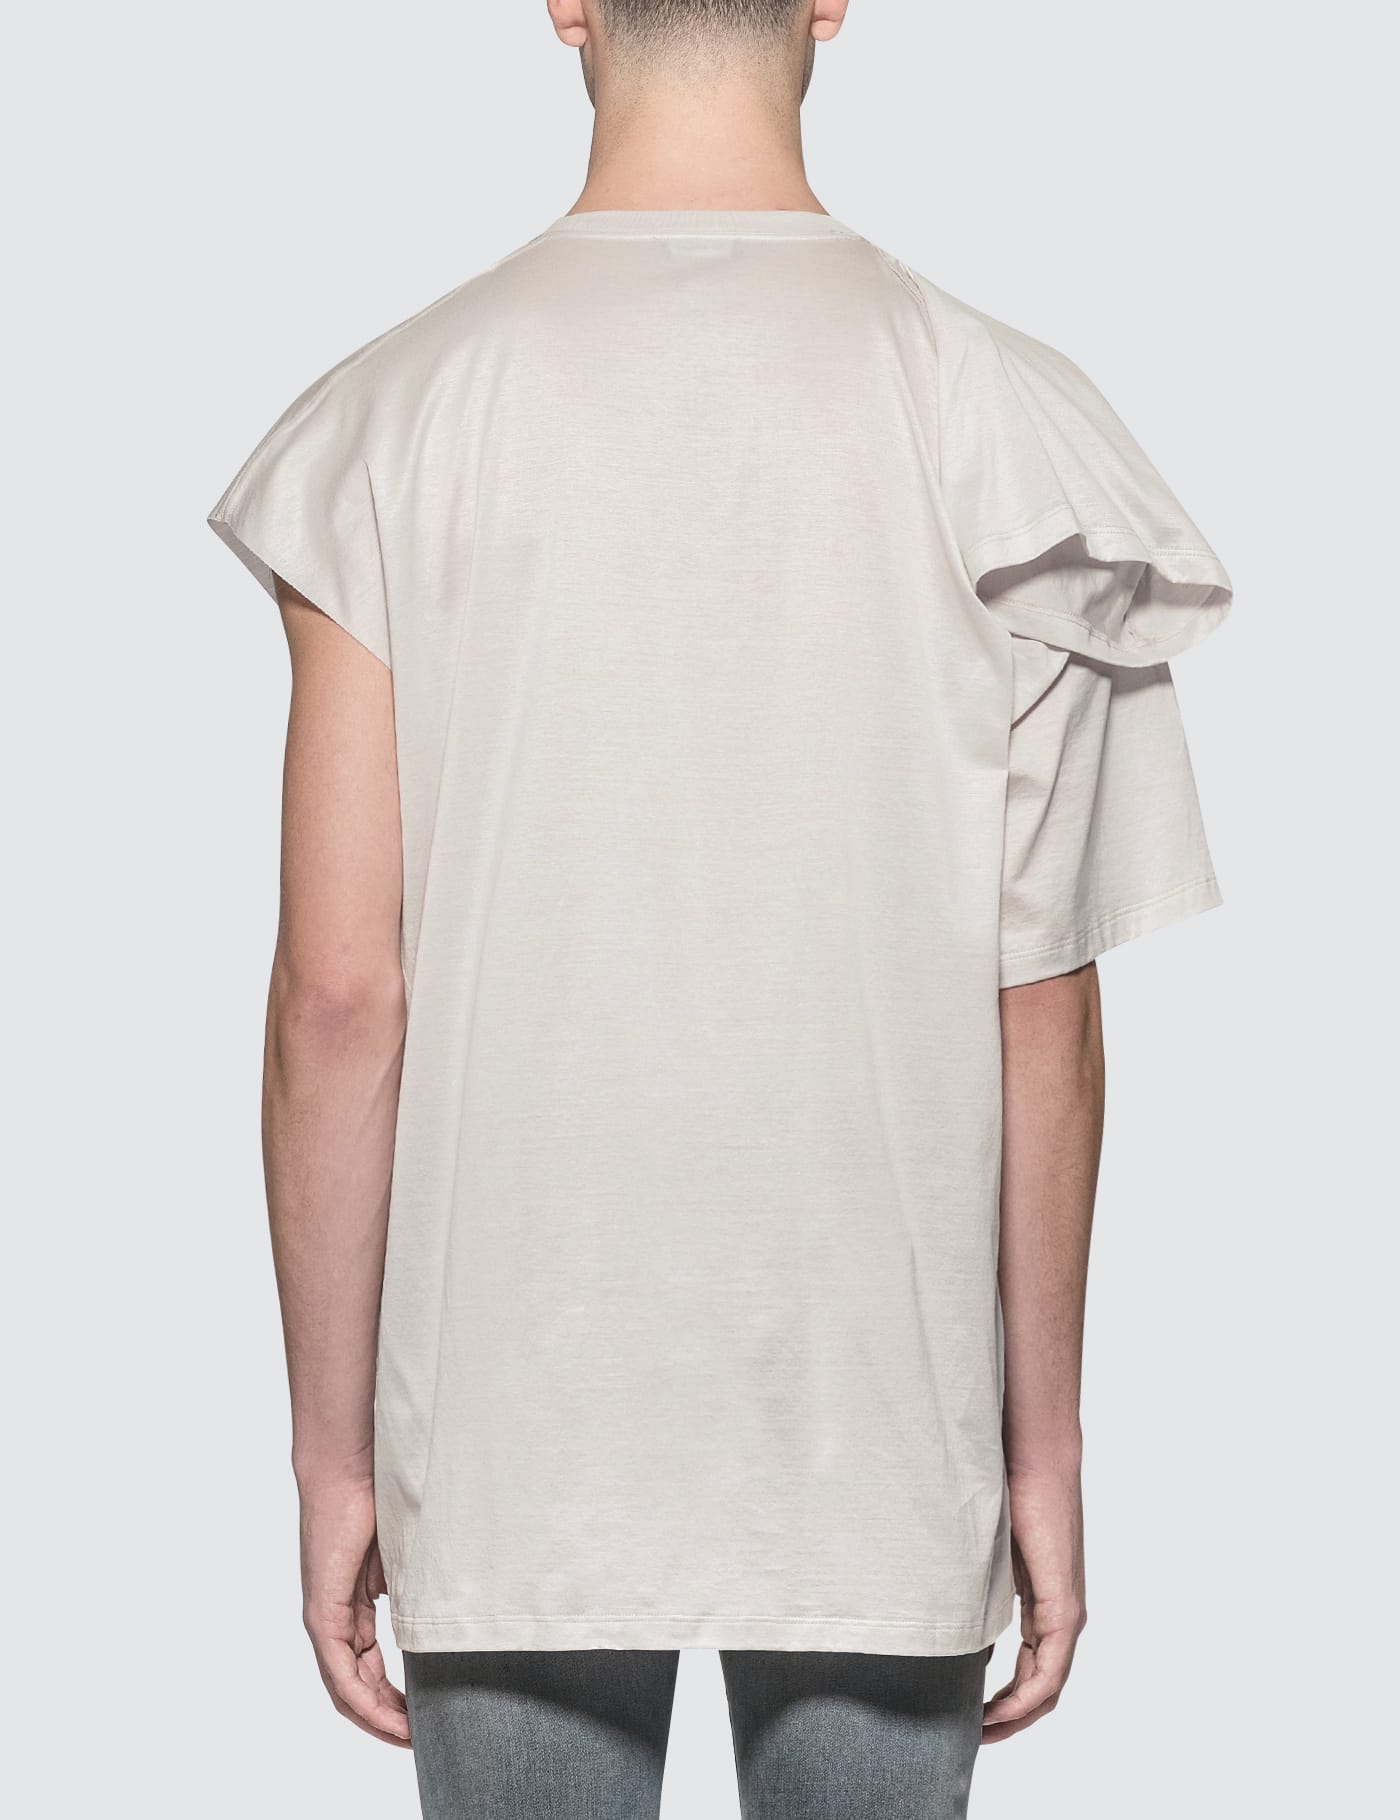 Raf Simons - T-Shirt With Displaced Sleeve | HBX - Globally